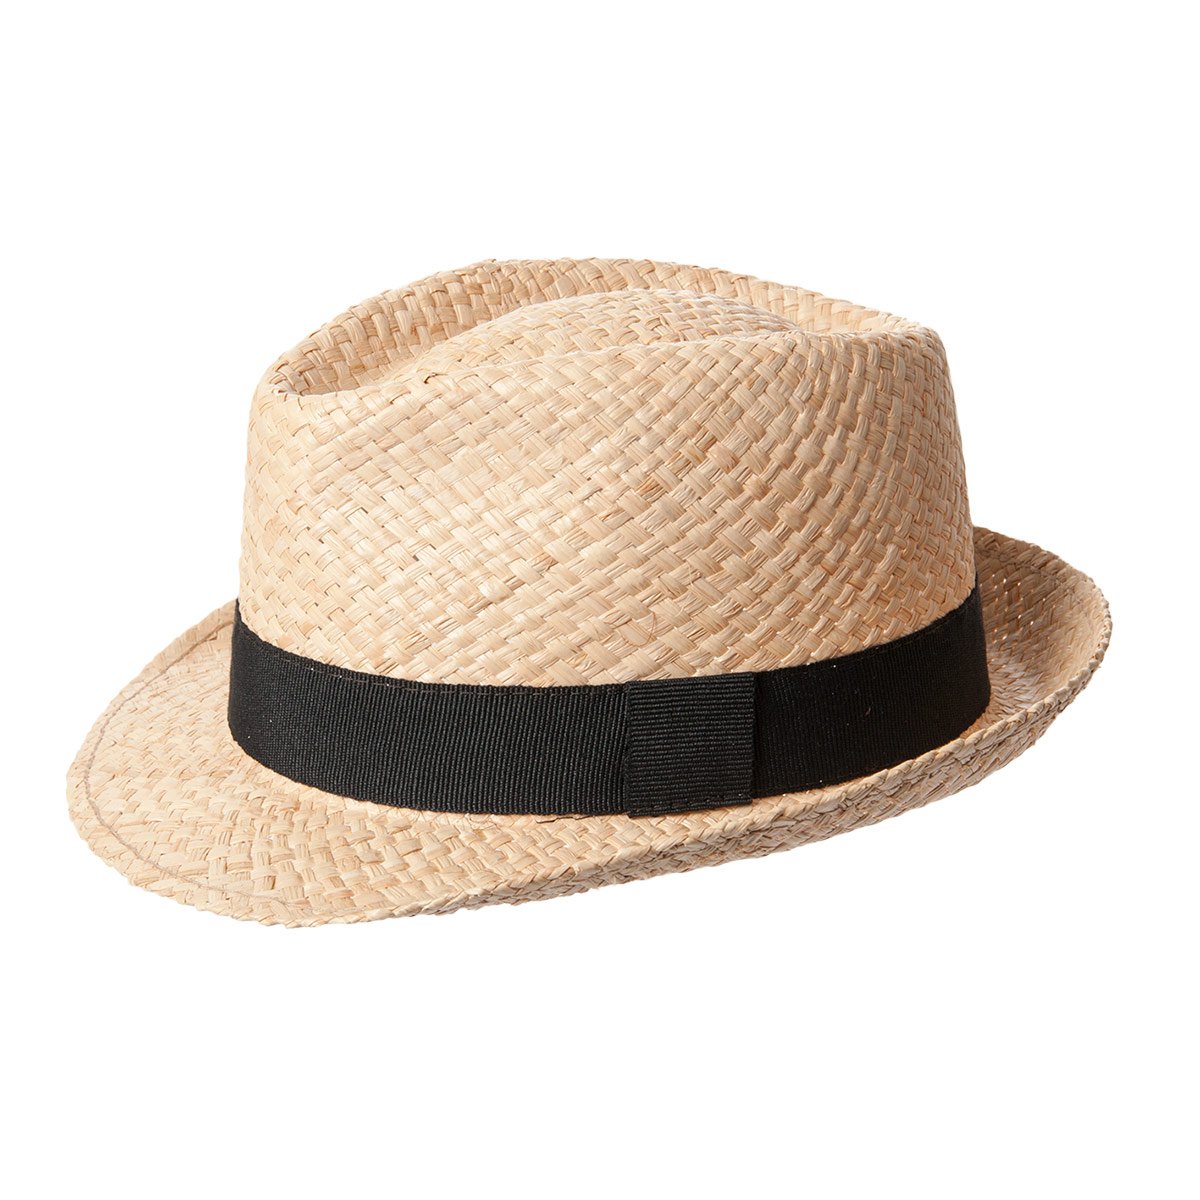 Trilby sun hat made of 100% natural straw